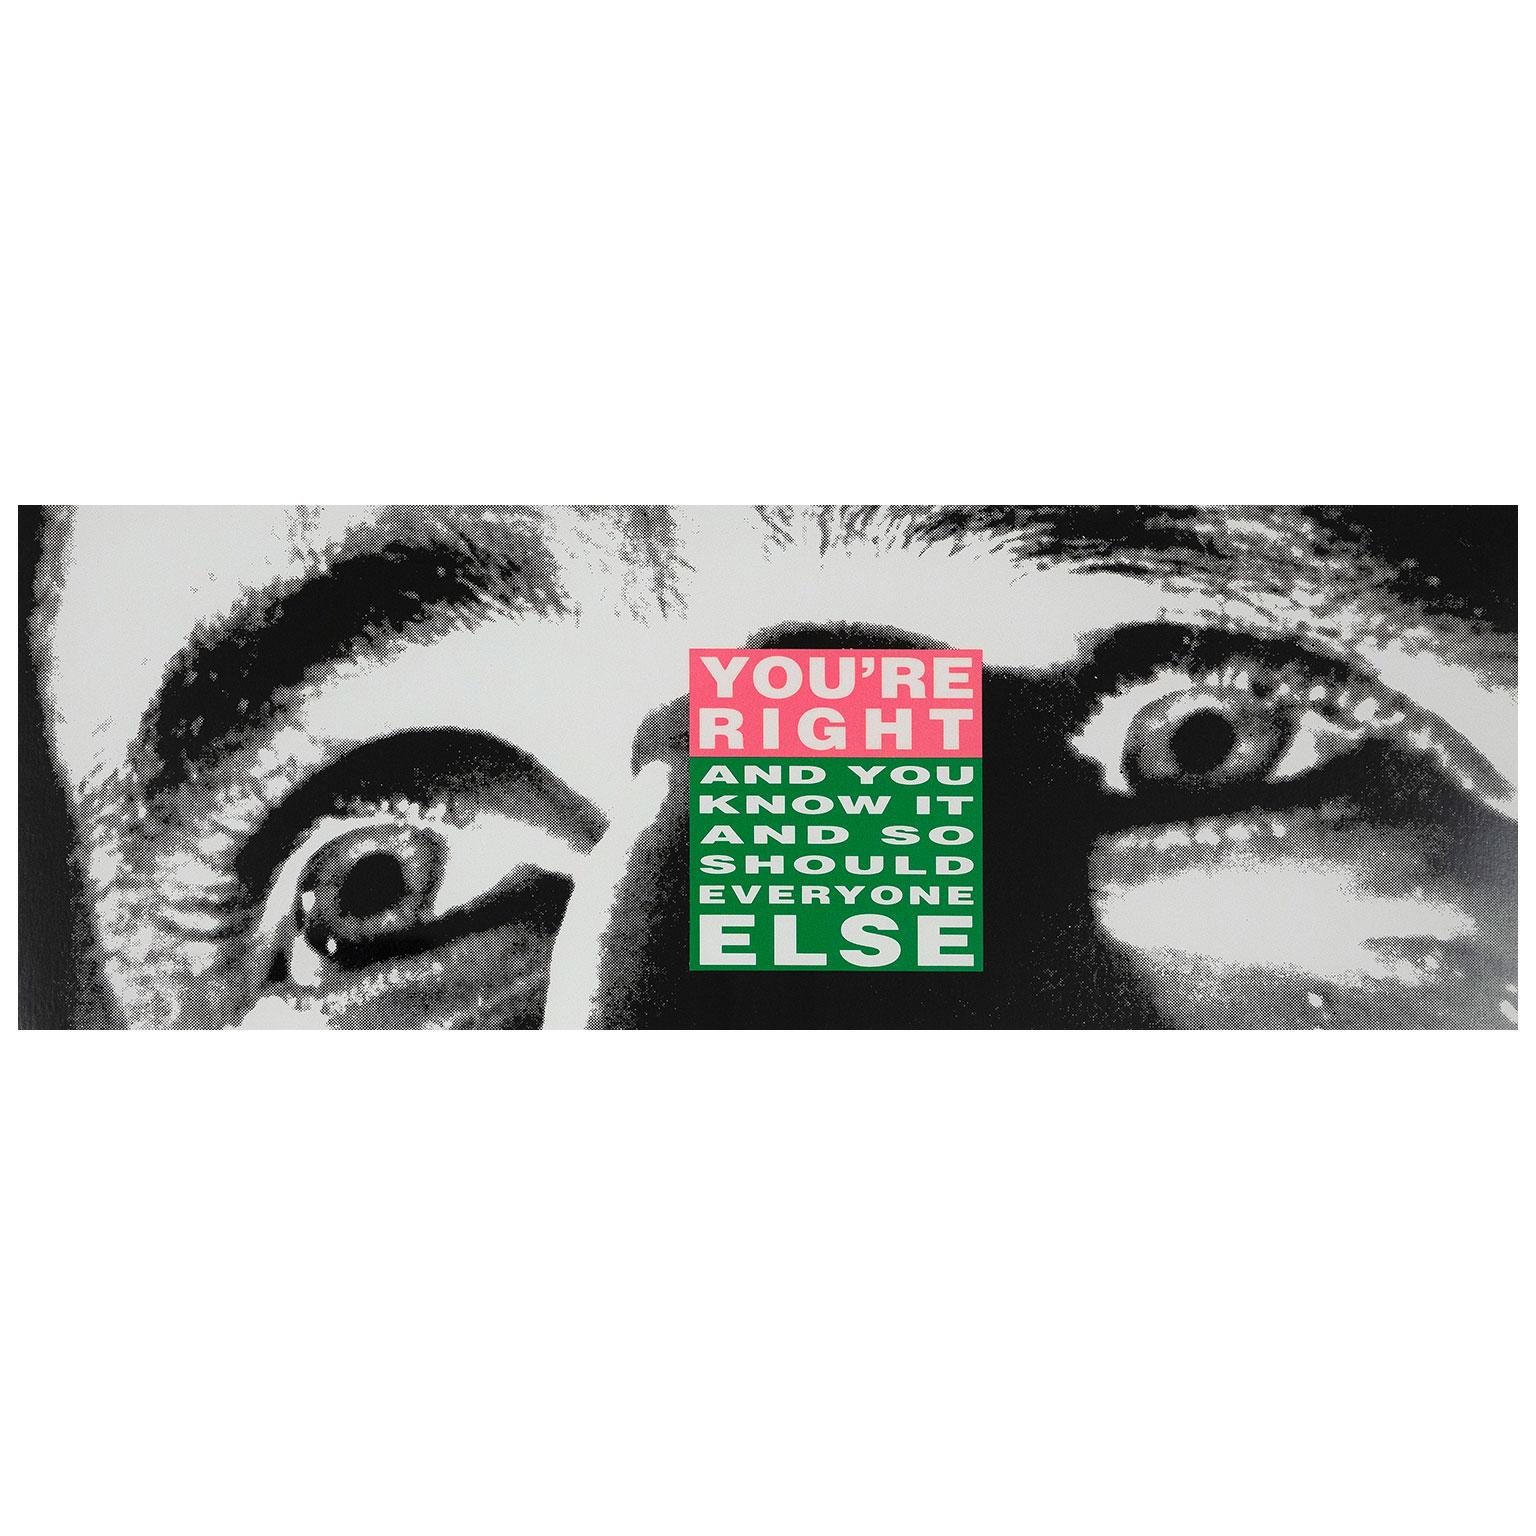 Barbara Kruger is one of the world's most provocative, distinctive and original artists.

In 2005, she was awarded the 